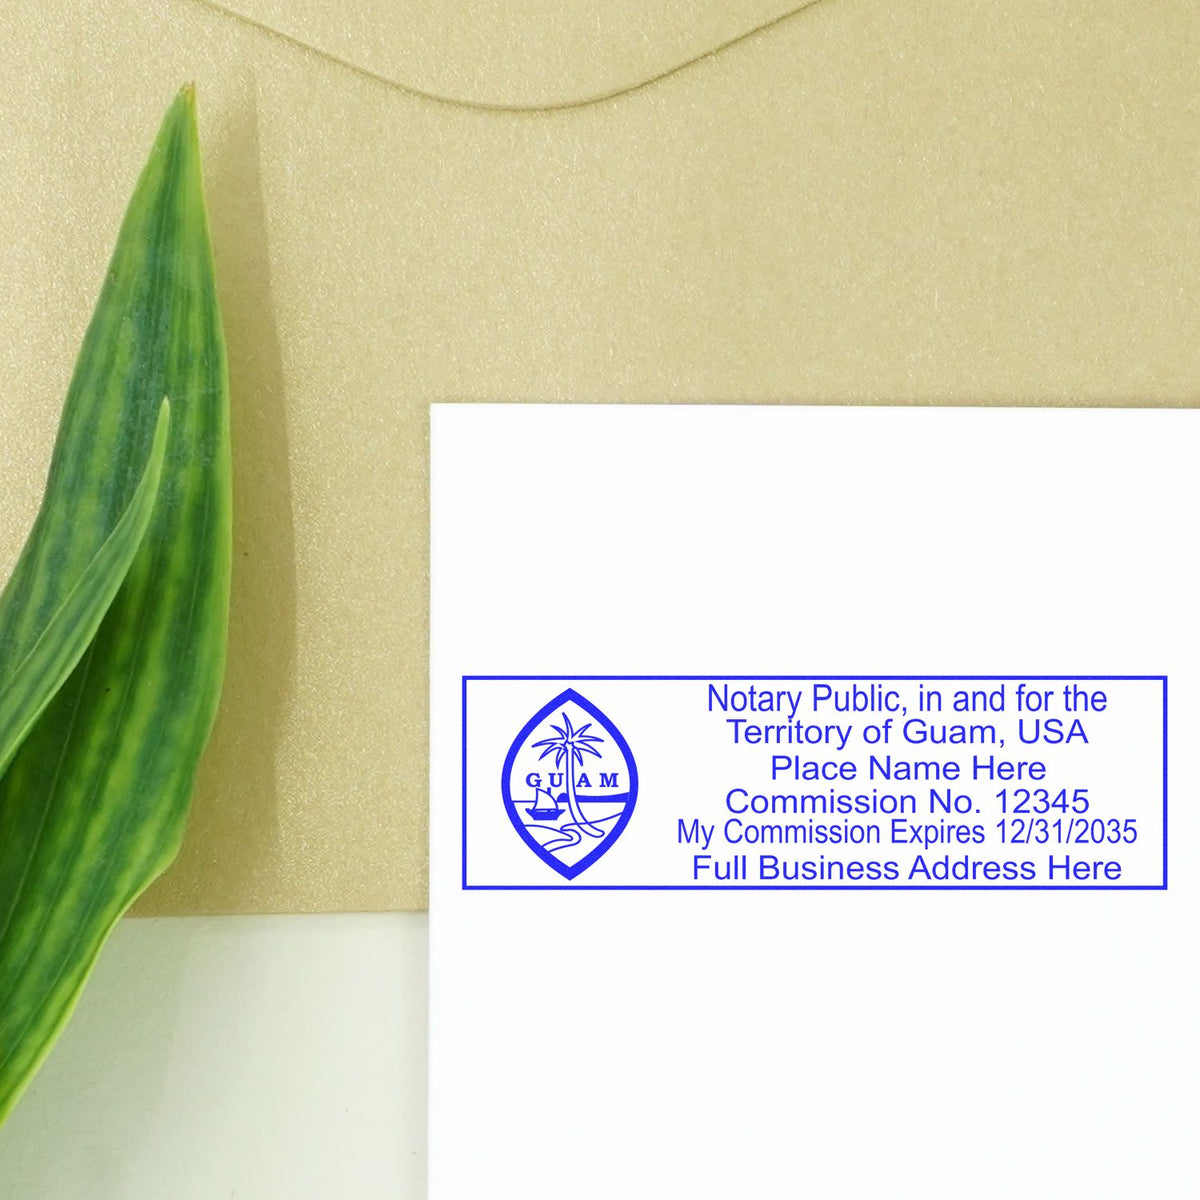 The MaxLight Premium Pre-Inked Guam Rectangular Notarial Stamp stamp impression comes to life with a crisp, detailed photo on paper - showcasing true professional quality.